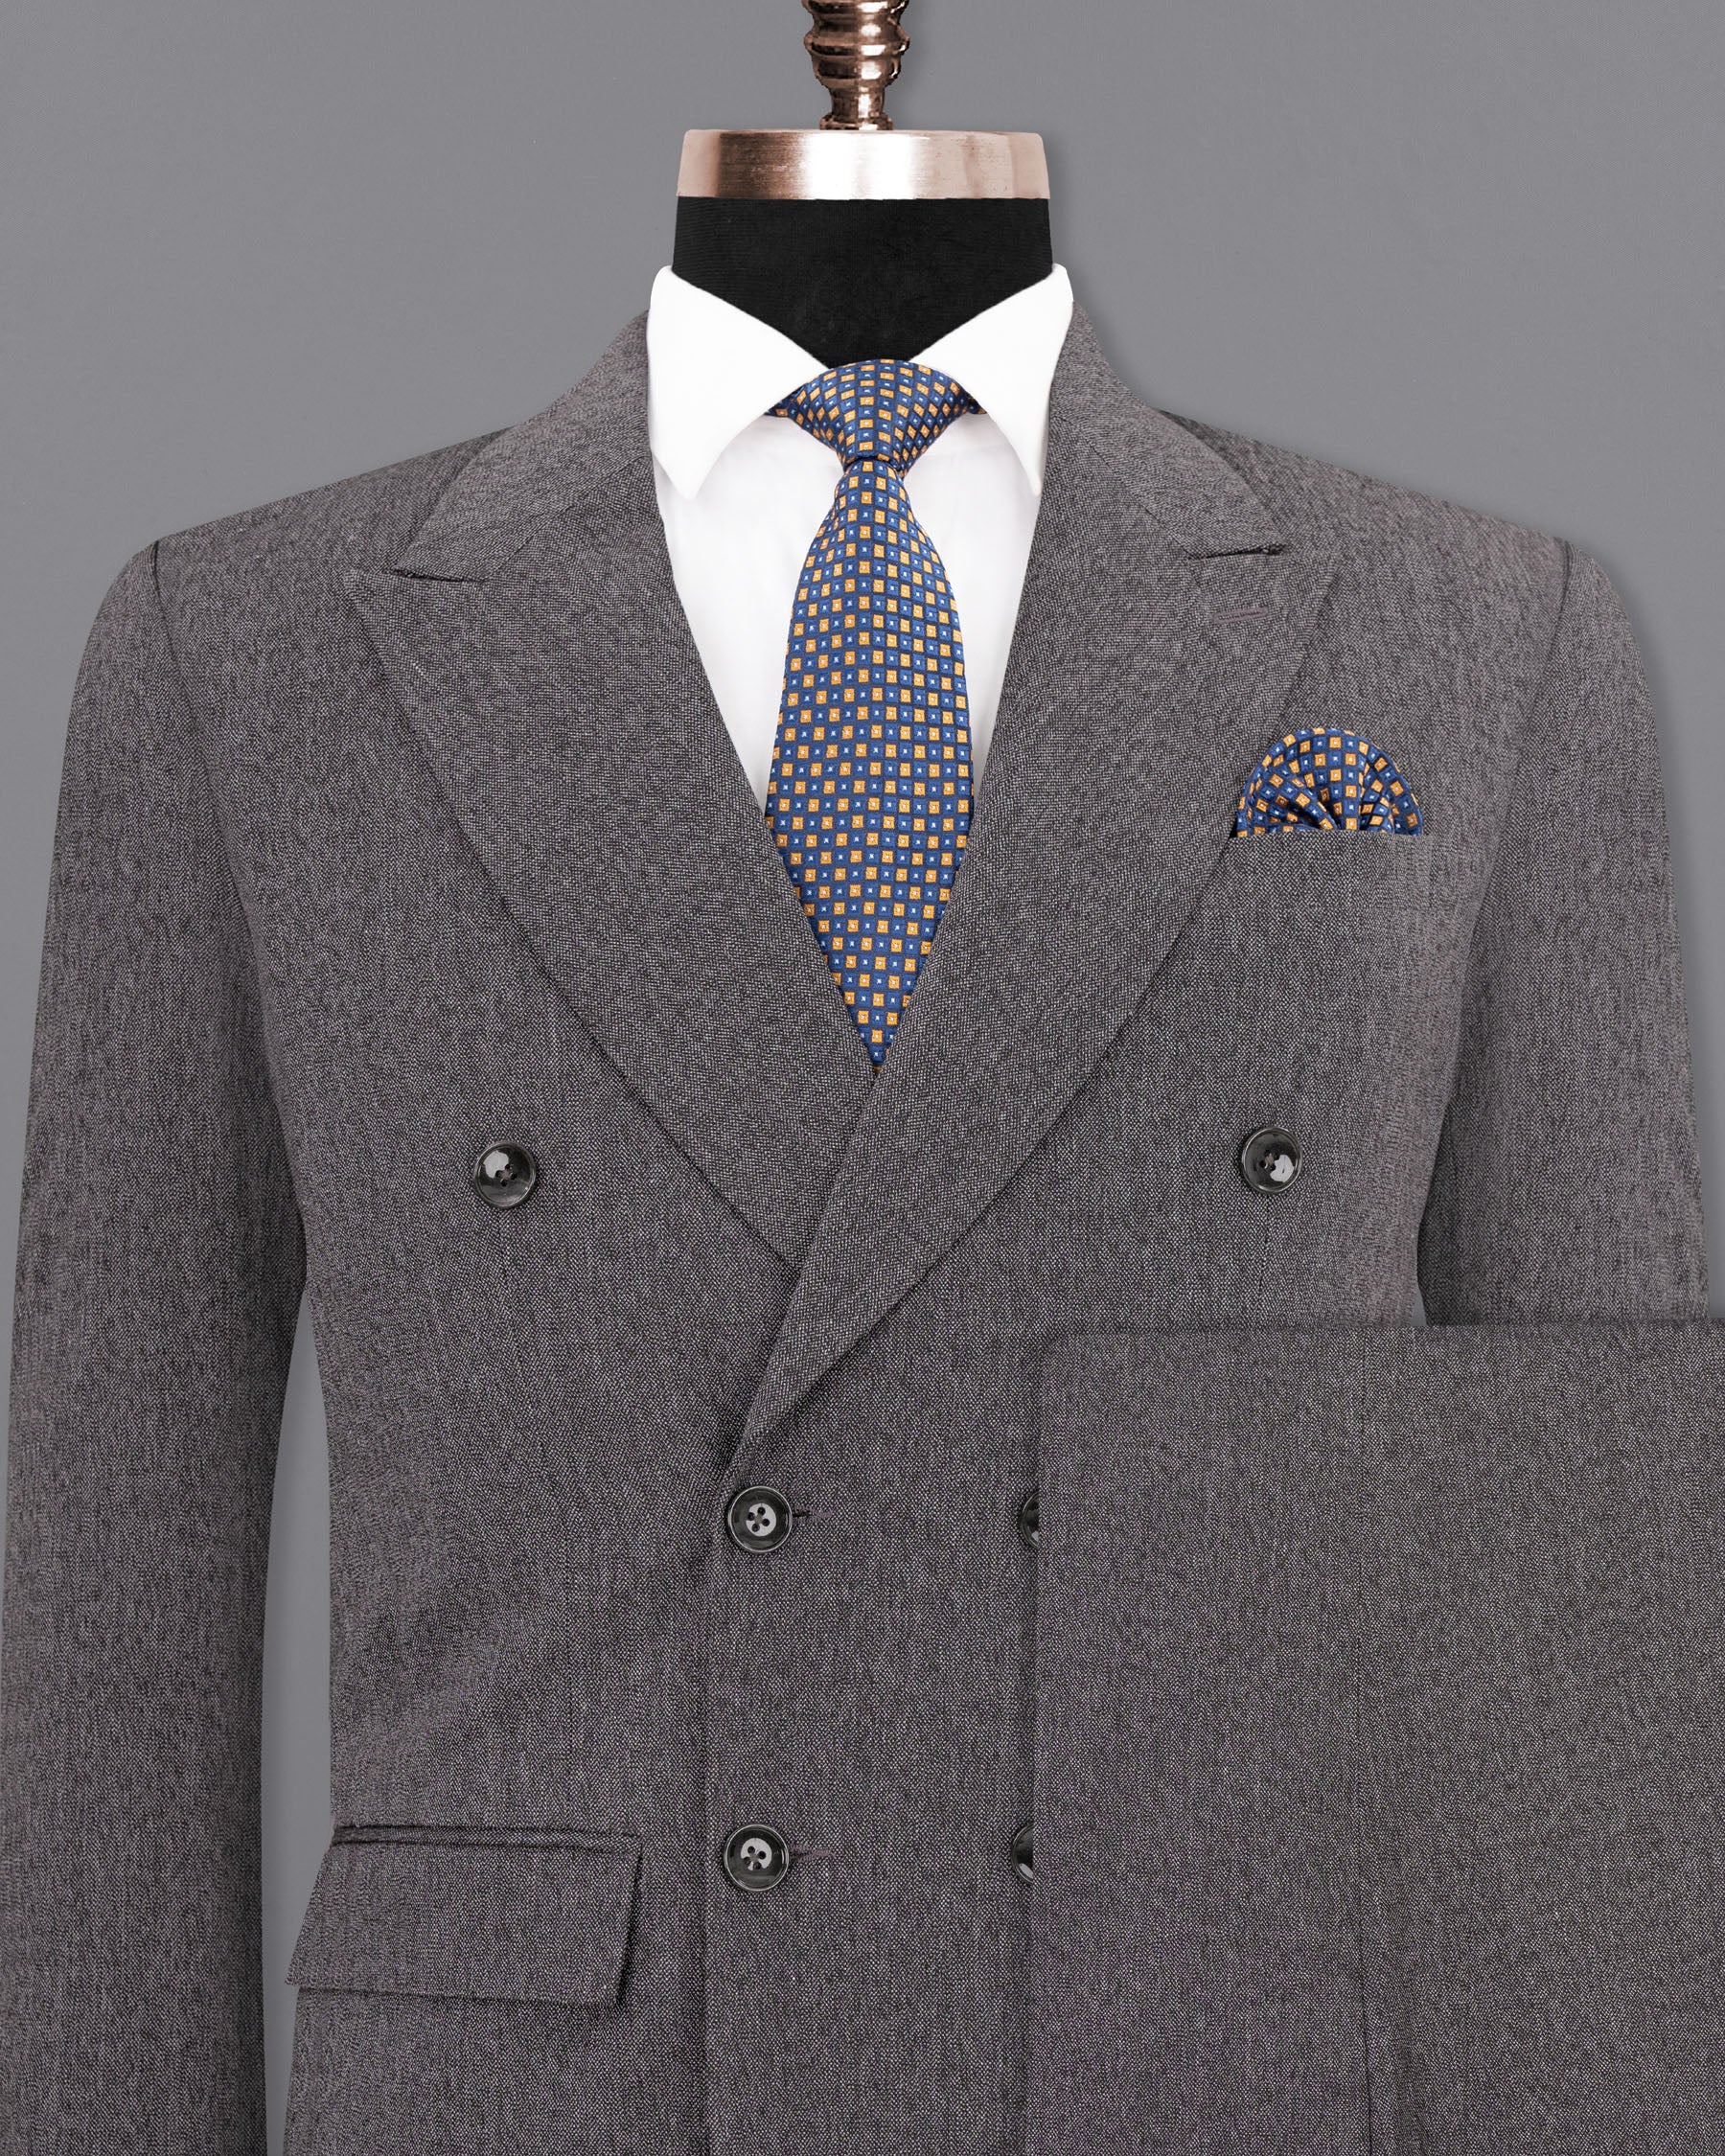 Mobster Grey DouSTe-Breasted Premium Cotton Suit ST1451-DB-36,ST1451-DB-38,ST1451-DB-40,ST1451-DB-42,ST1451-DB-44,ST1451-DB-46,ST1451-DB-48,ST1451-DB-50,ST1451-DB-52,ST1451-DB-54,ST1451-DB-56,ST1451-DB-58,ST1451-DB-60